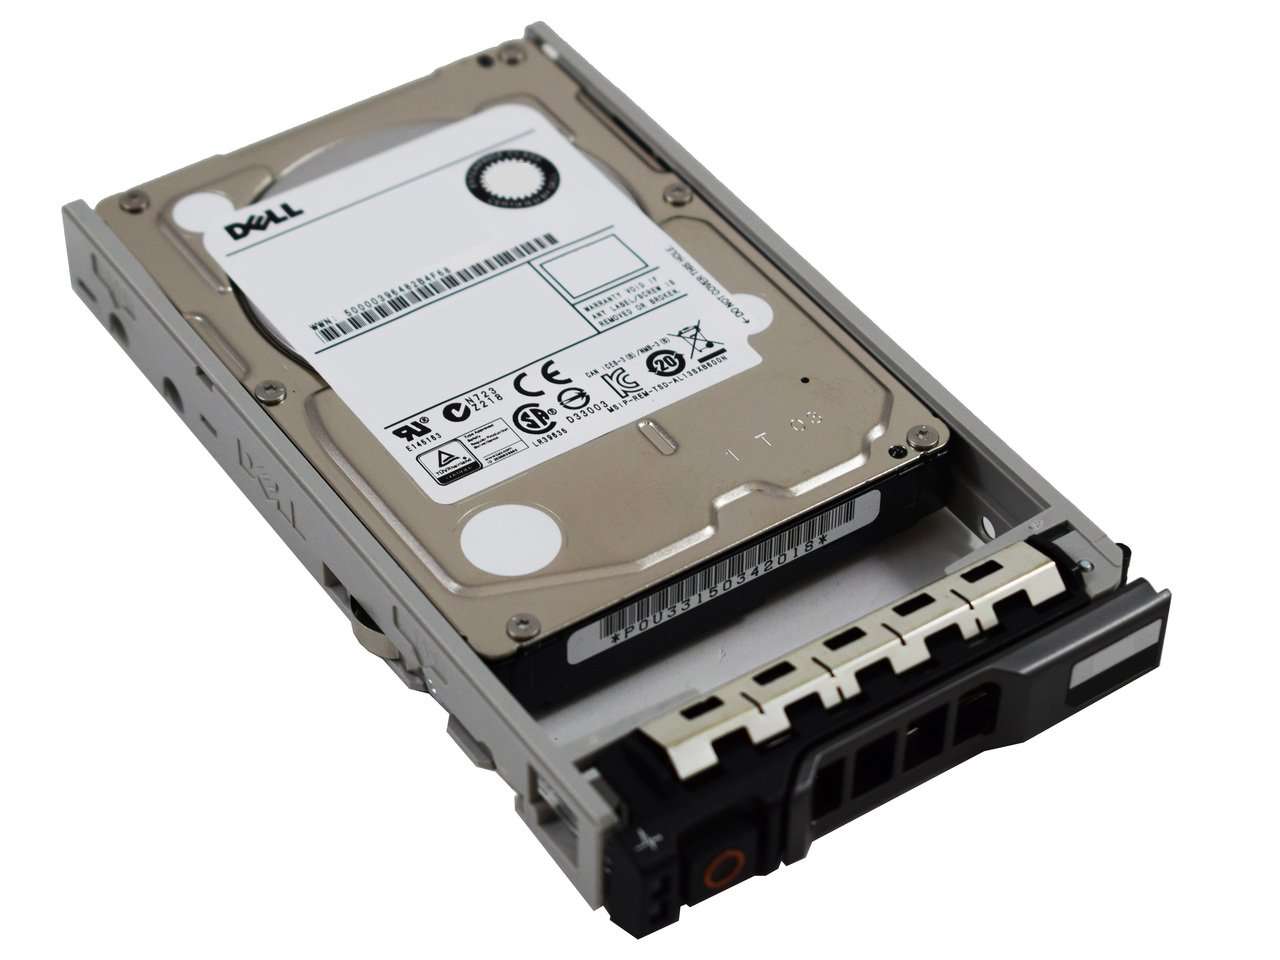 Dell G13 342-2348 600GB 10K RPM SAS 6Gb/s 512n 2.5" Manufacturer Recertified HDD